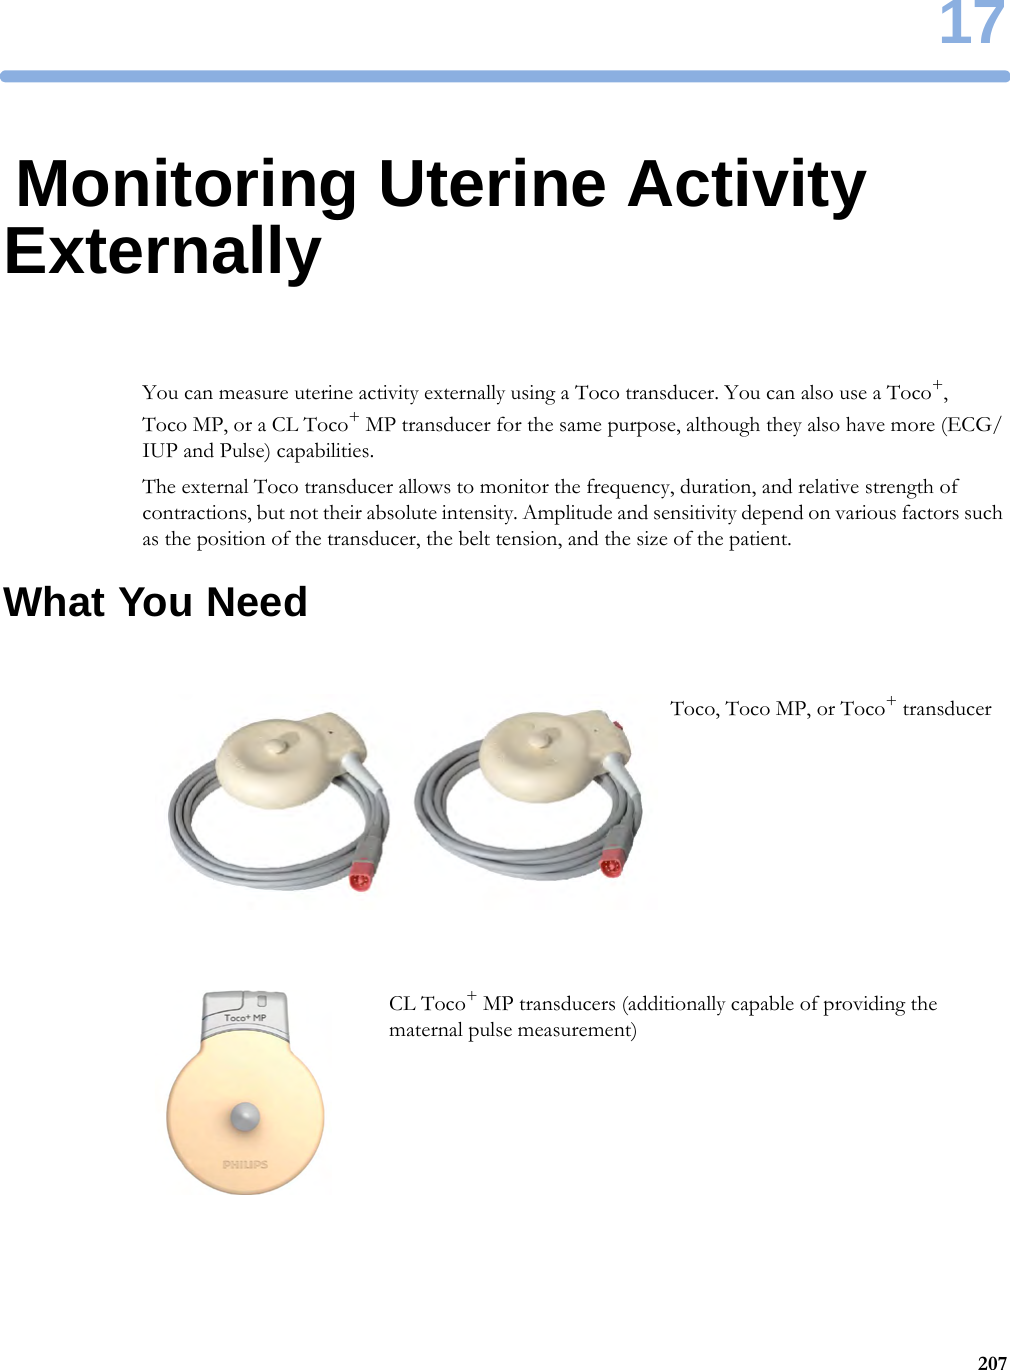 1720717Monitoring Uterine Activity ExternallyYou can measure uterine activity externally using a Toco transducer. You can also use a Toco+, Toco MP, or a CL Toco+ MP transducer for the same purpose, although they also have more (ECG/IUP and Pulse) capabilities.The external Toco transducer allows to monitor the frequency, duration, and relative strength of contractions, but not their absolute intensity. Amplitude and sensitivity depend on various factors such as the position of the transducer, the belt tension, and the size of the patient.What You NeedToco, Toco MP, or Toco+ transducerCL Toco+ MP transducers (additionally capable of providing the maternal pulse measurement)